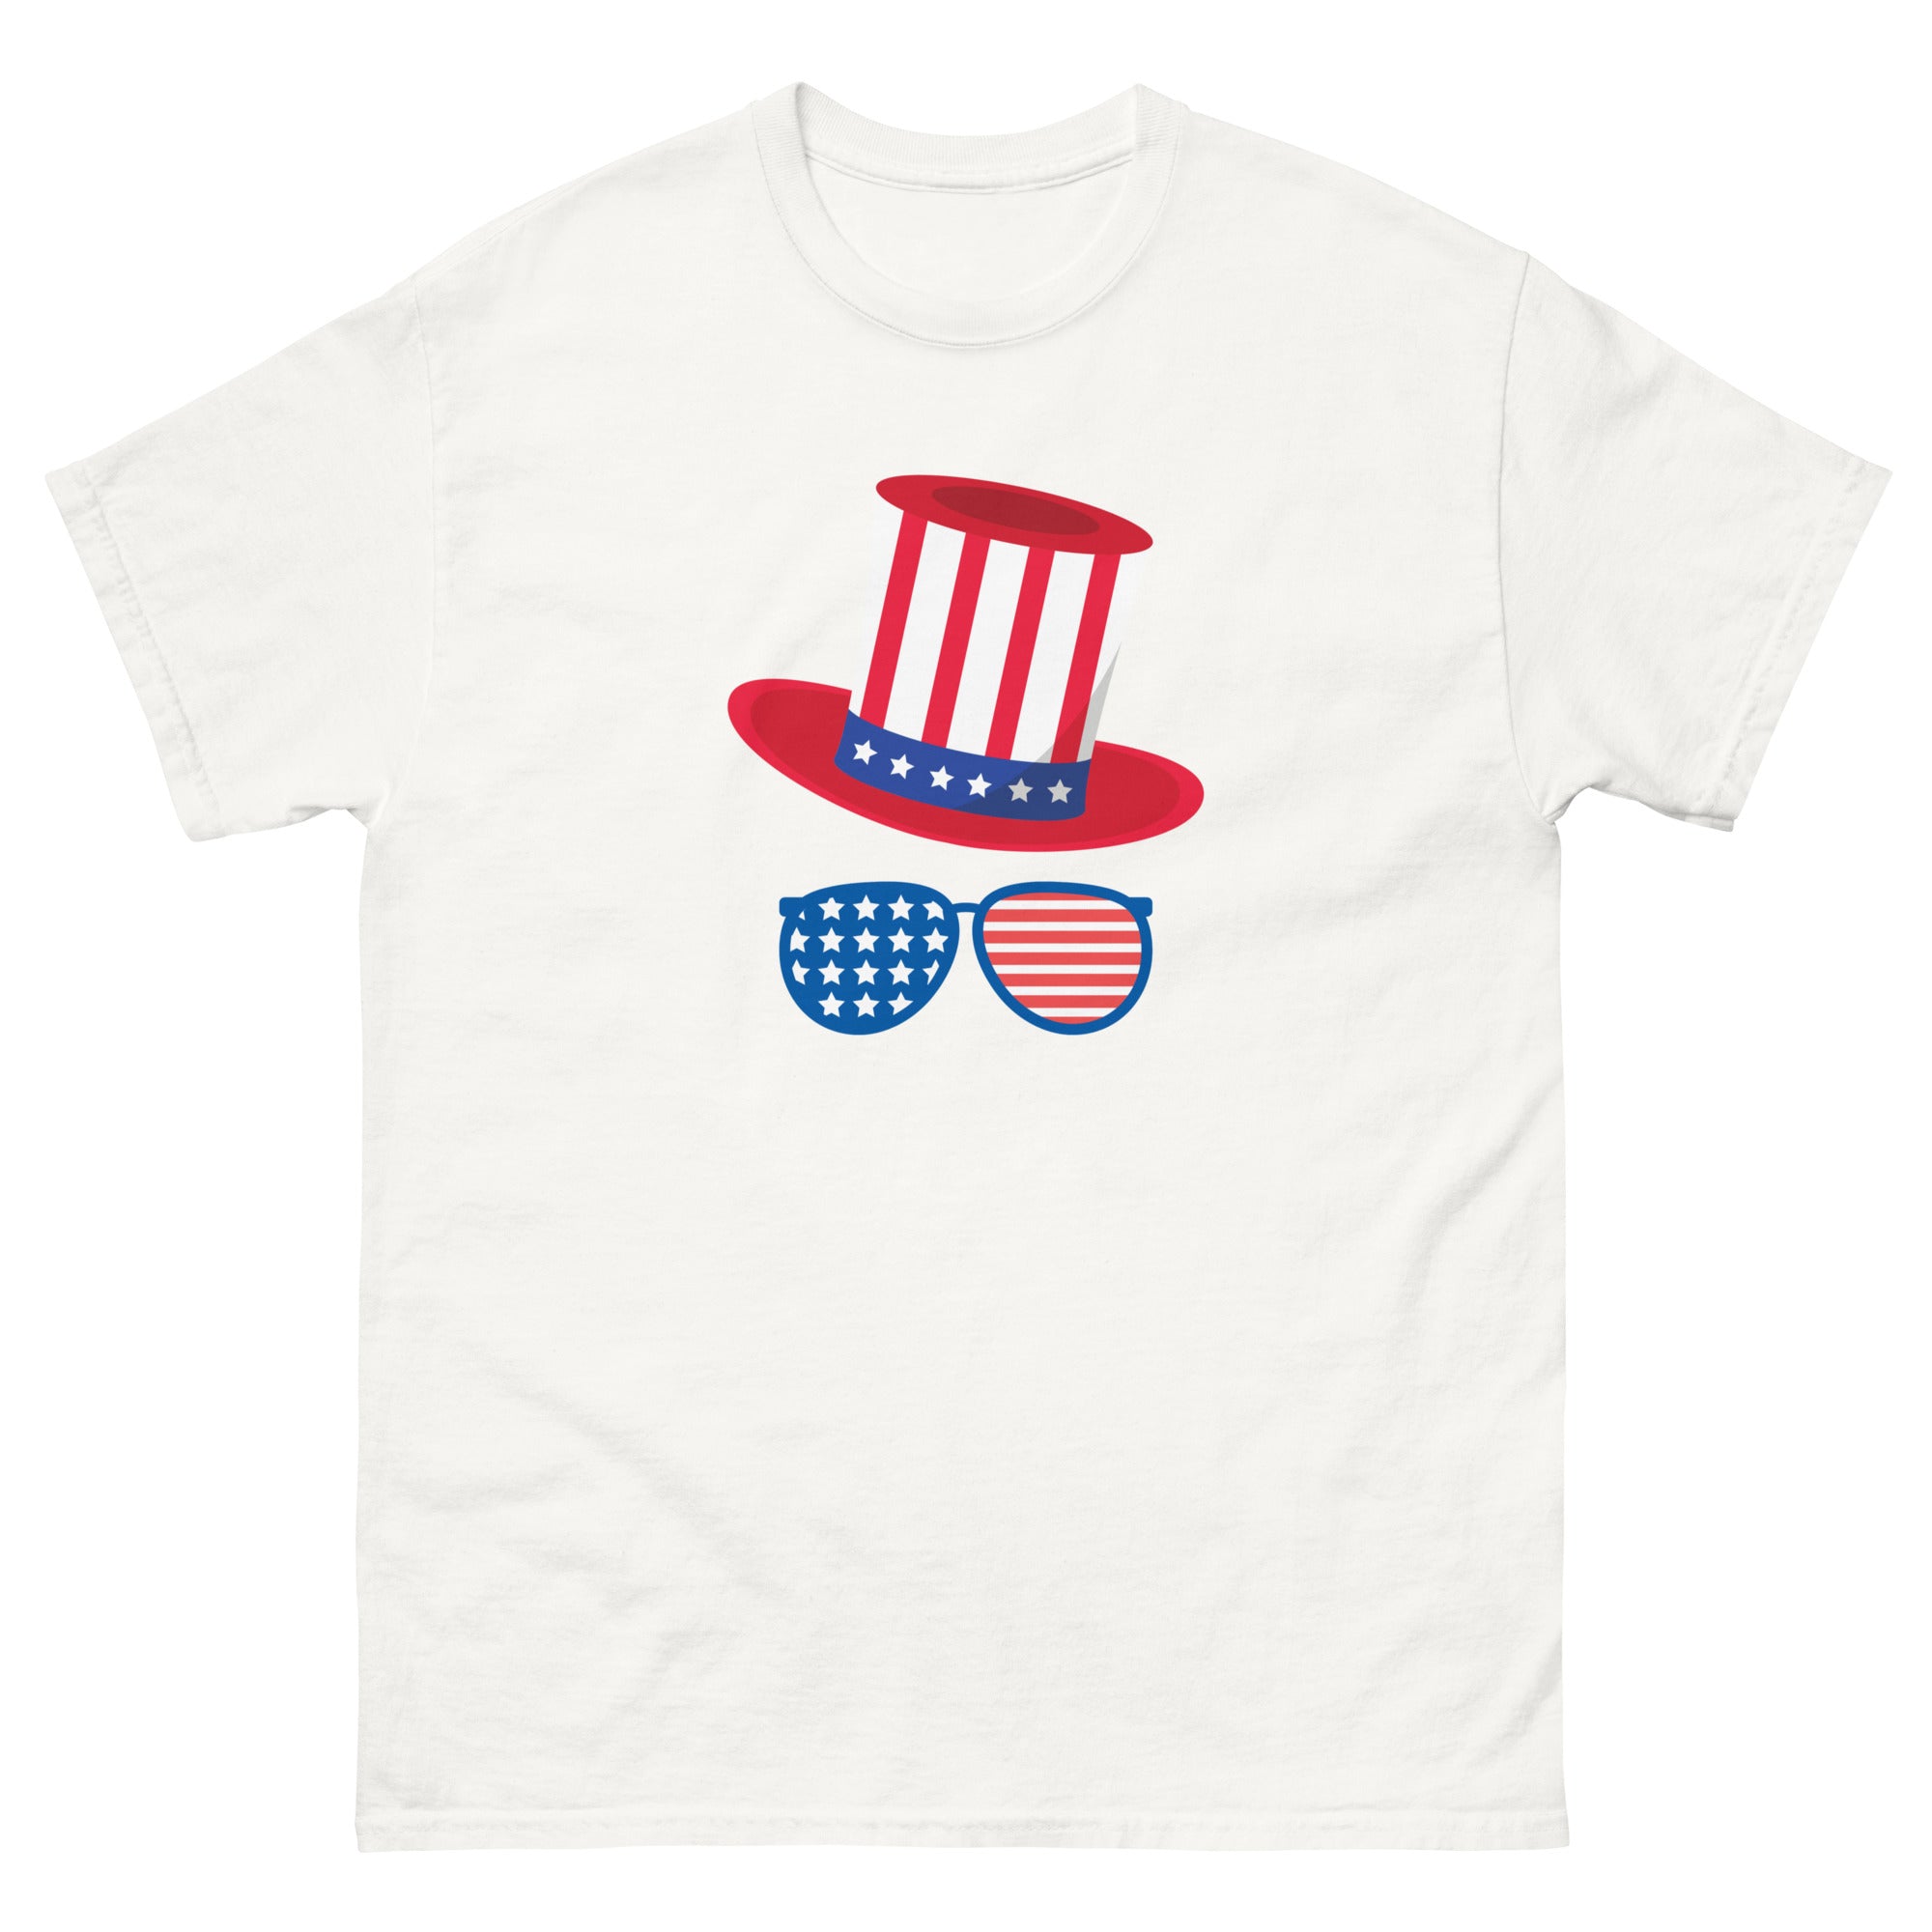 Men's shirt for coordinated family look during 4th of july or memorial day celebrations